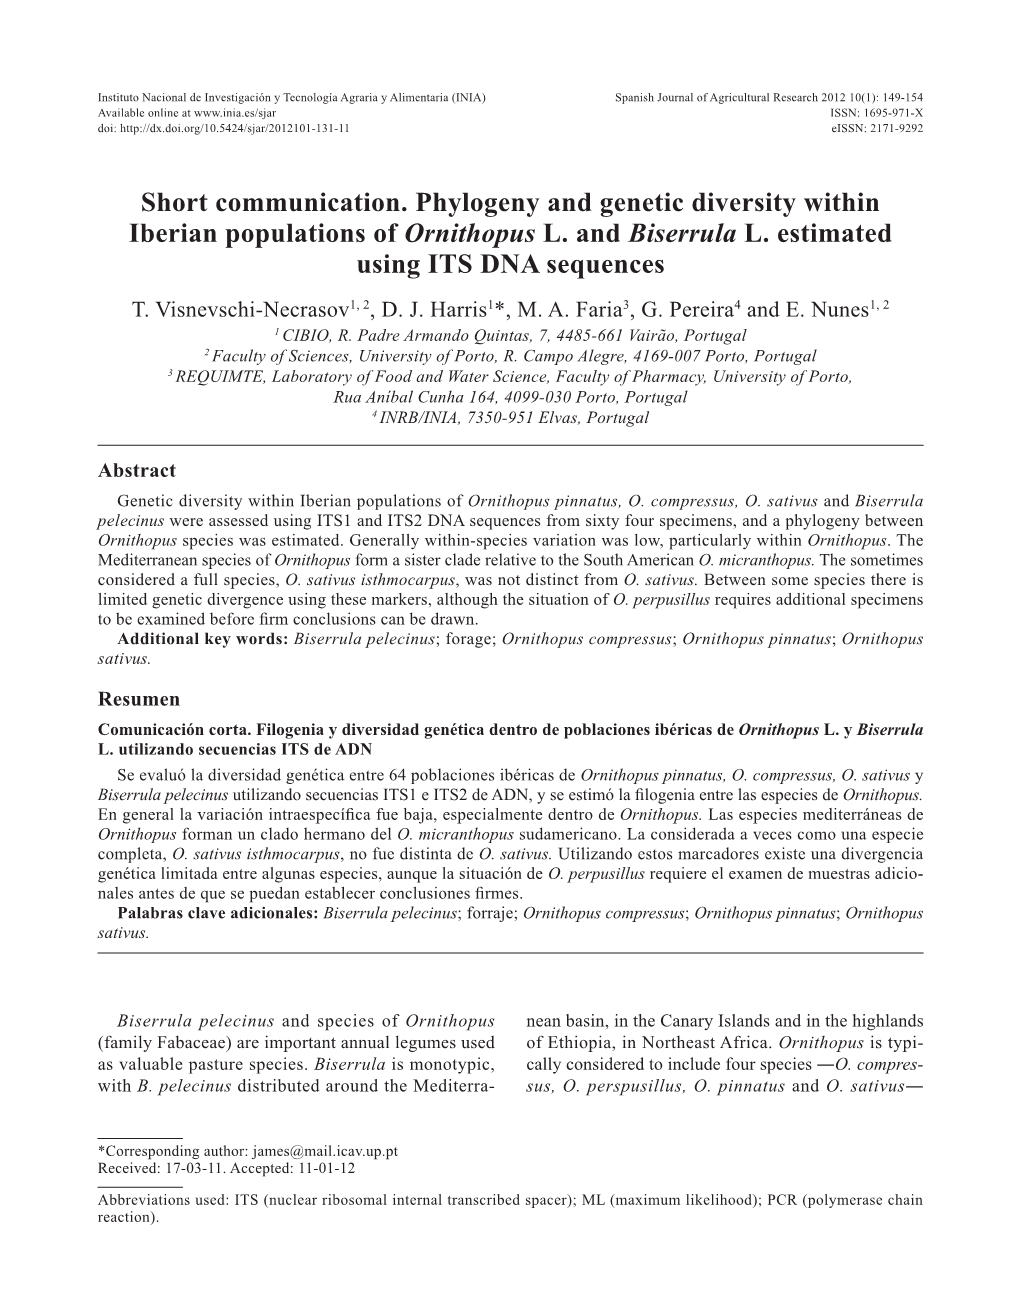 Short Communication. Phylogeny and Genetic Diversity Within Iberian Populations of Ornithopus L